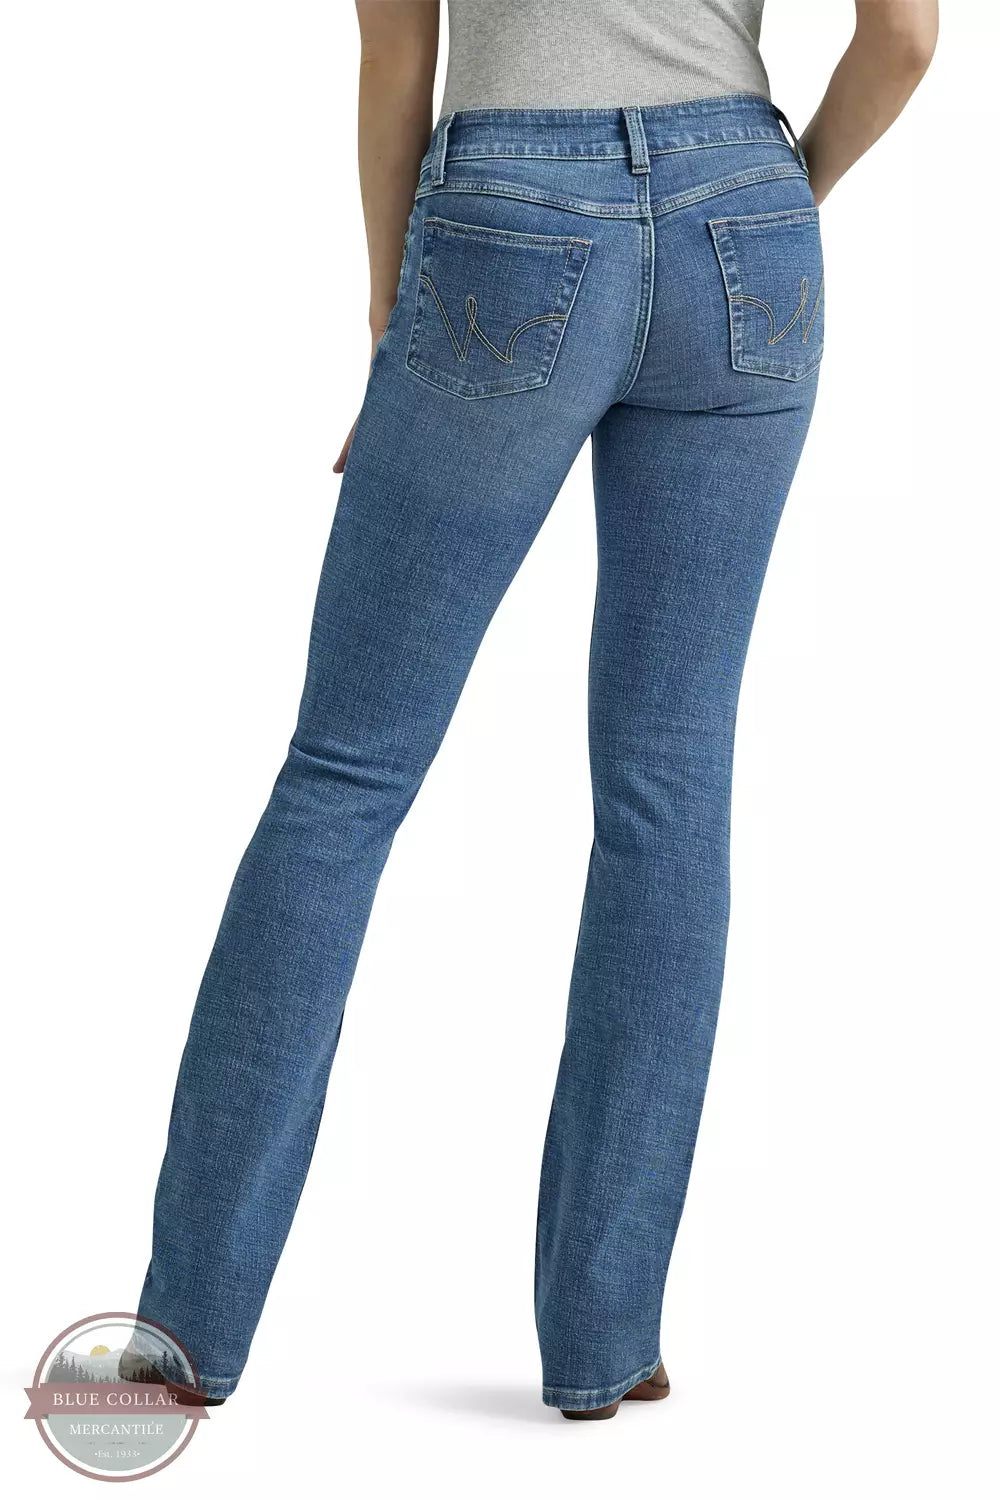 Wrangler 112345824 Essential Mid Rise Bootcut Jeans in Jayne Back View